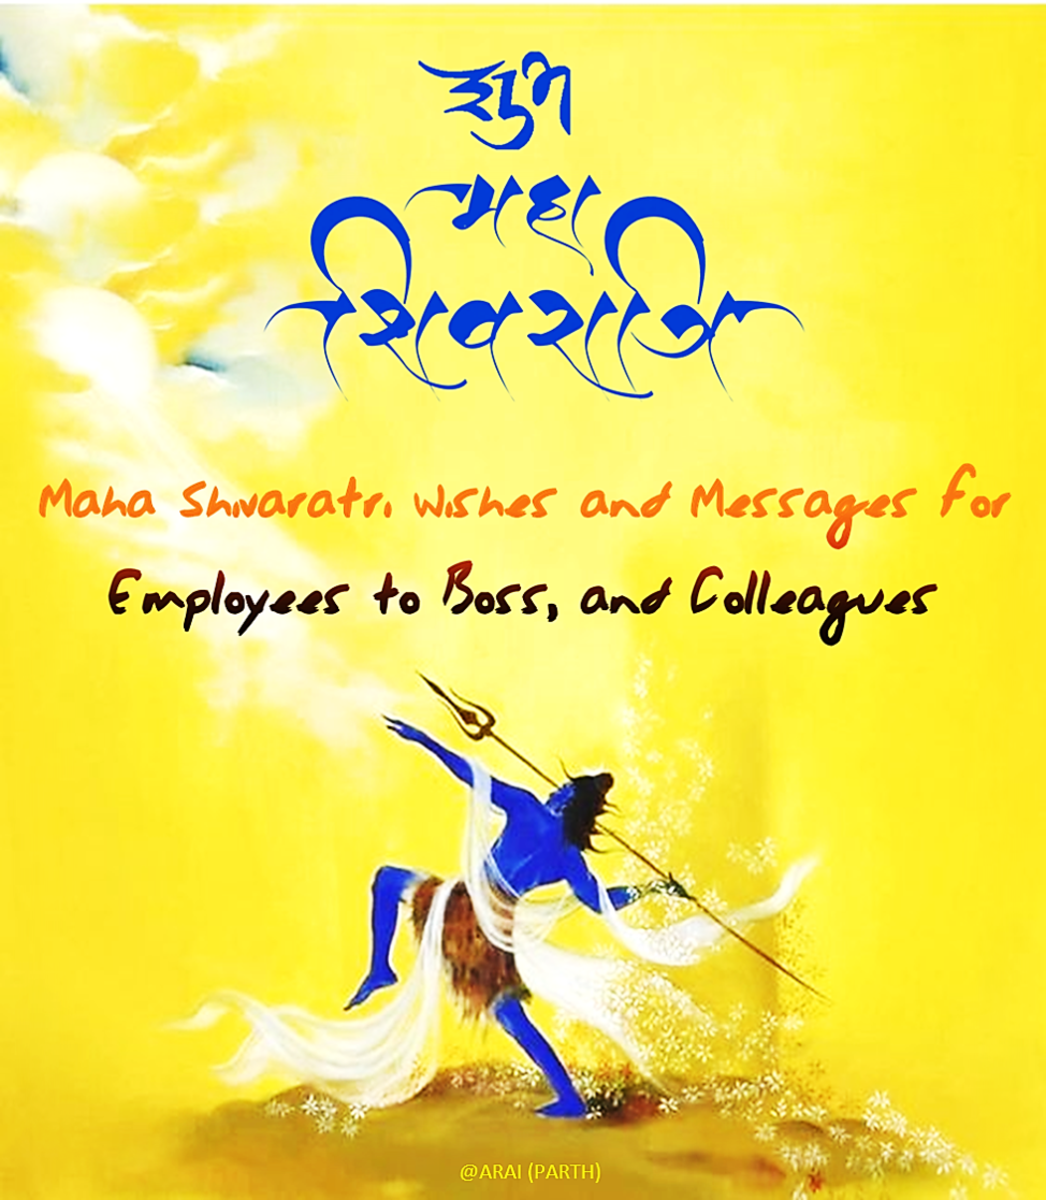 Happy Maha Shivaratri Wishes, Messages for Company Employees, Colleagues, and Boss